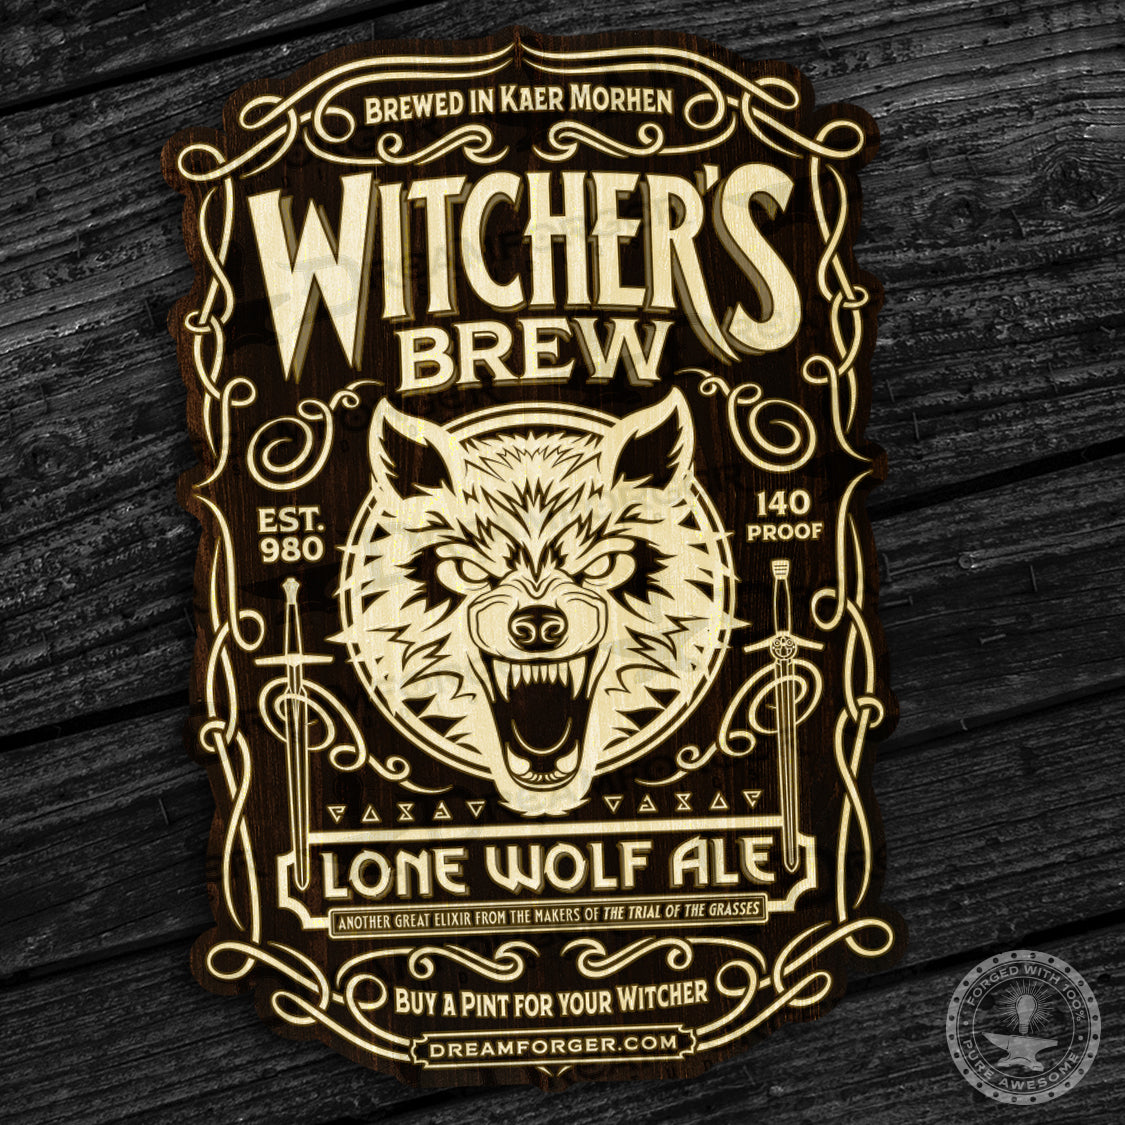 The Witchering "Witcher's Brew" GITD Magical Decal